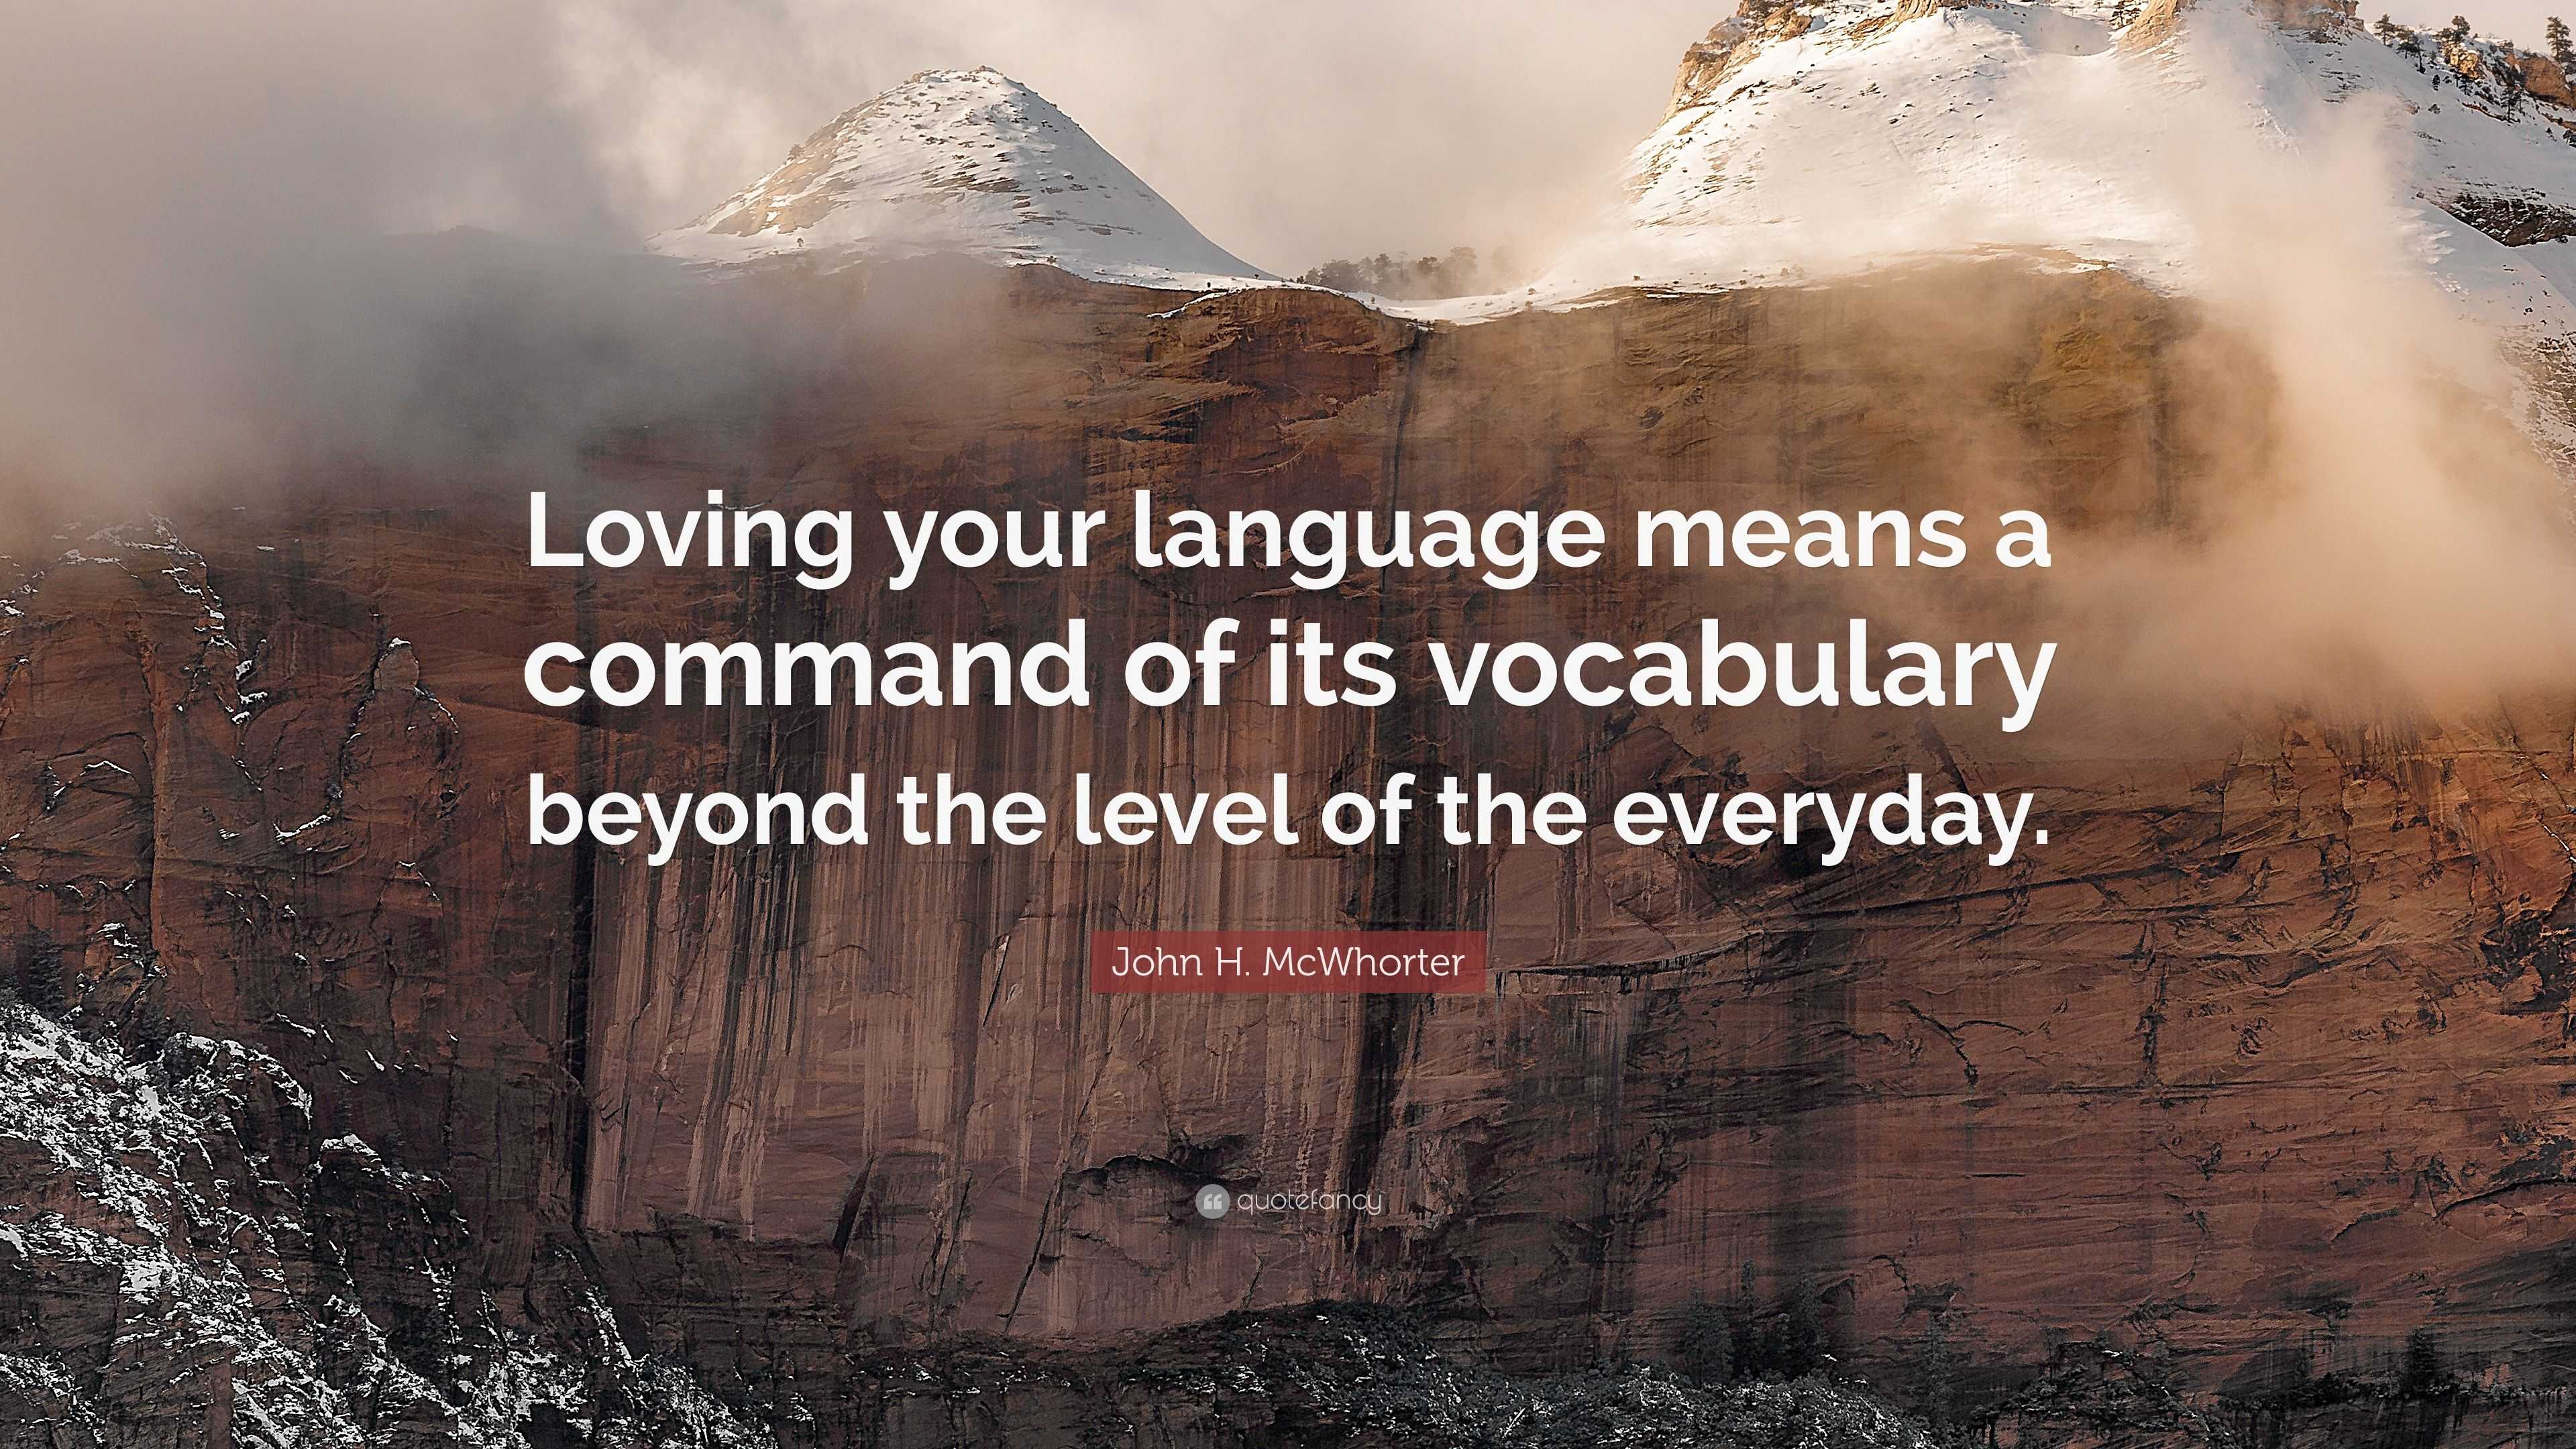 John H. McWhorter Quote: “Loving your language means a command of its ...